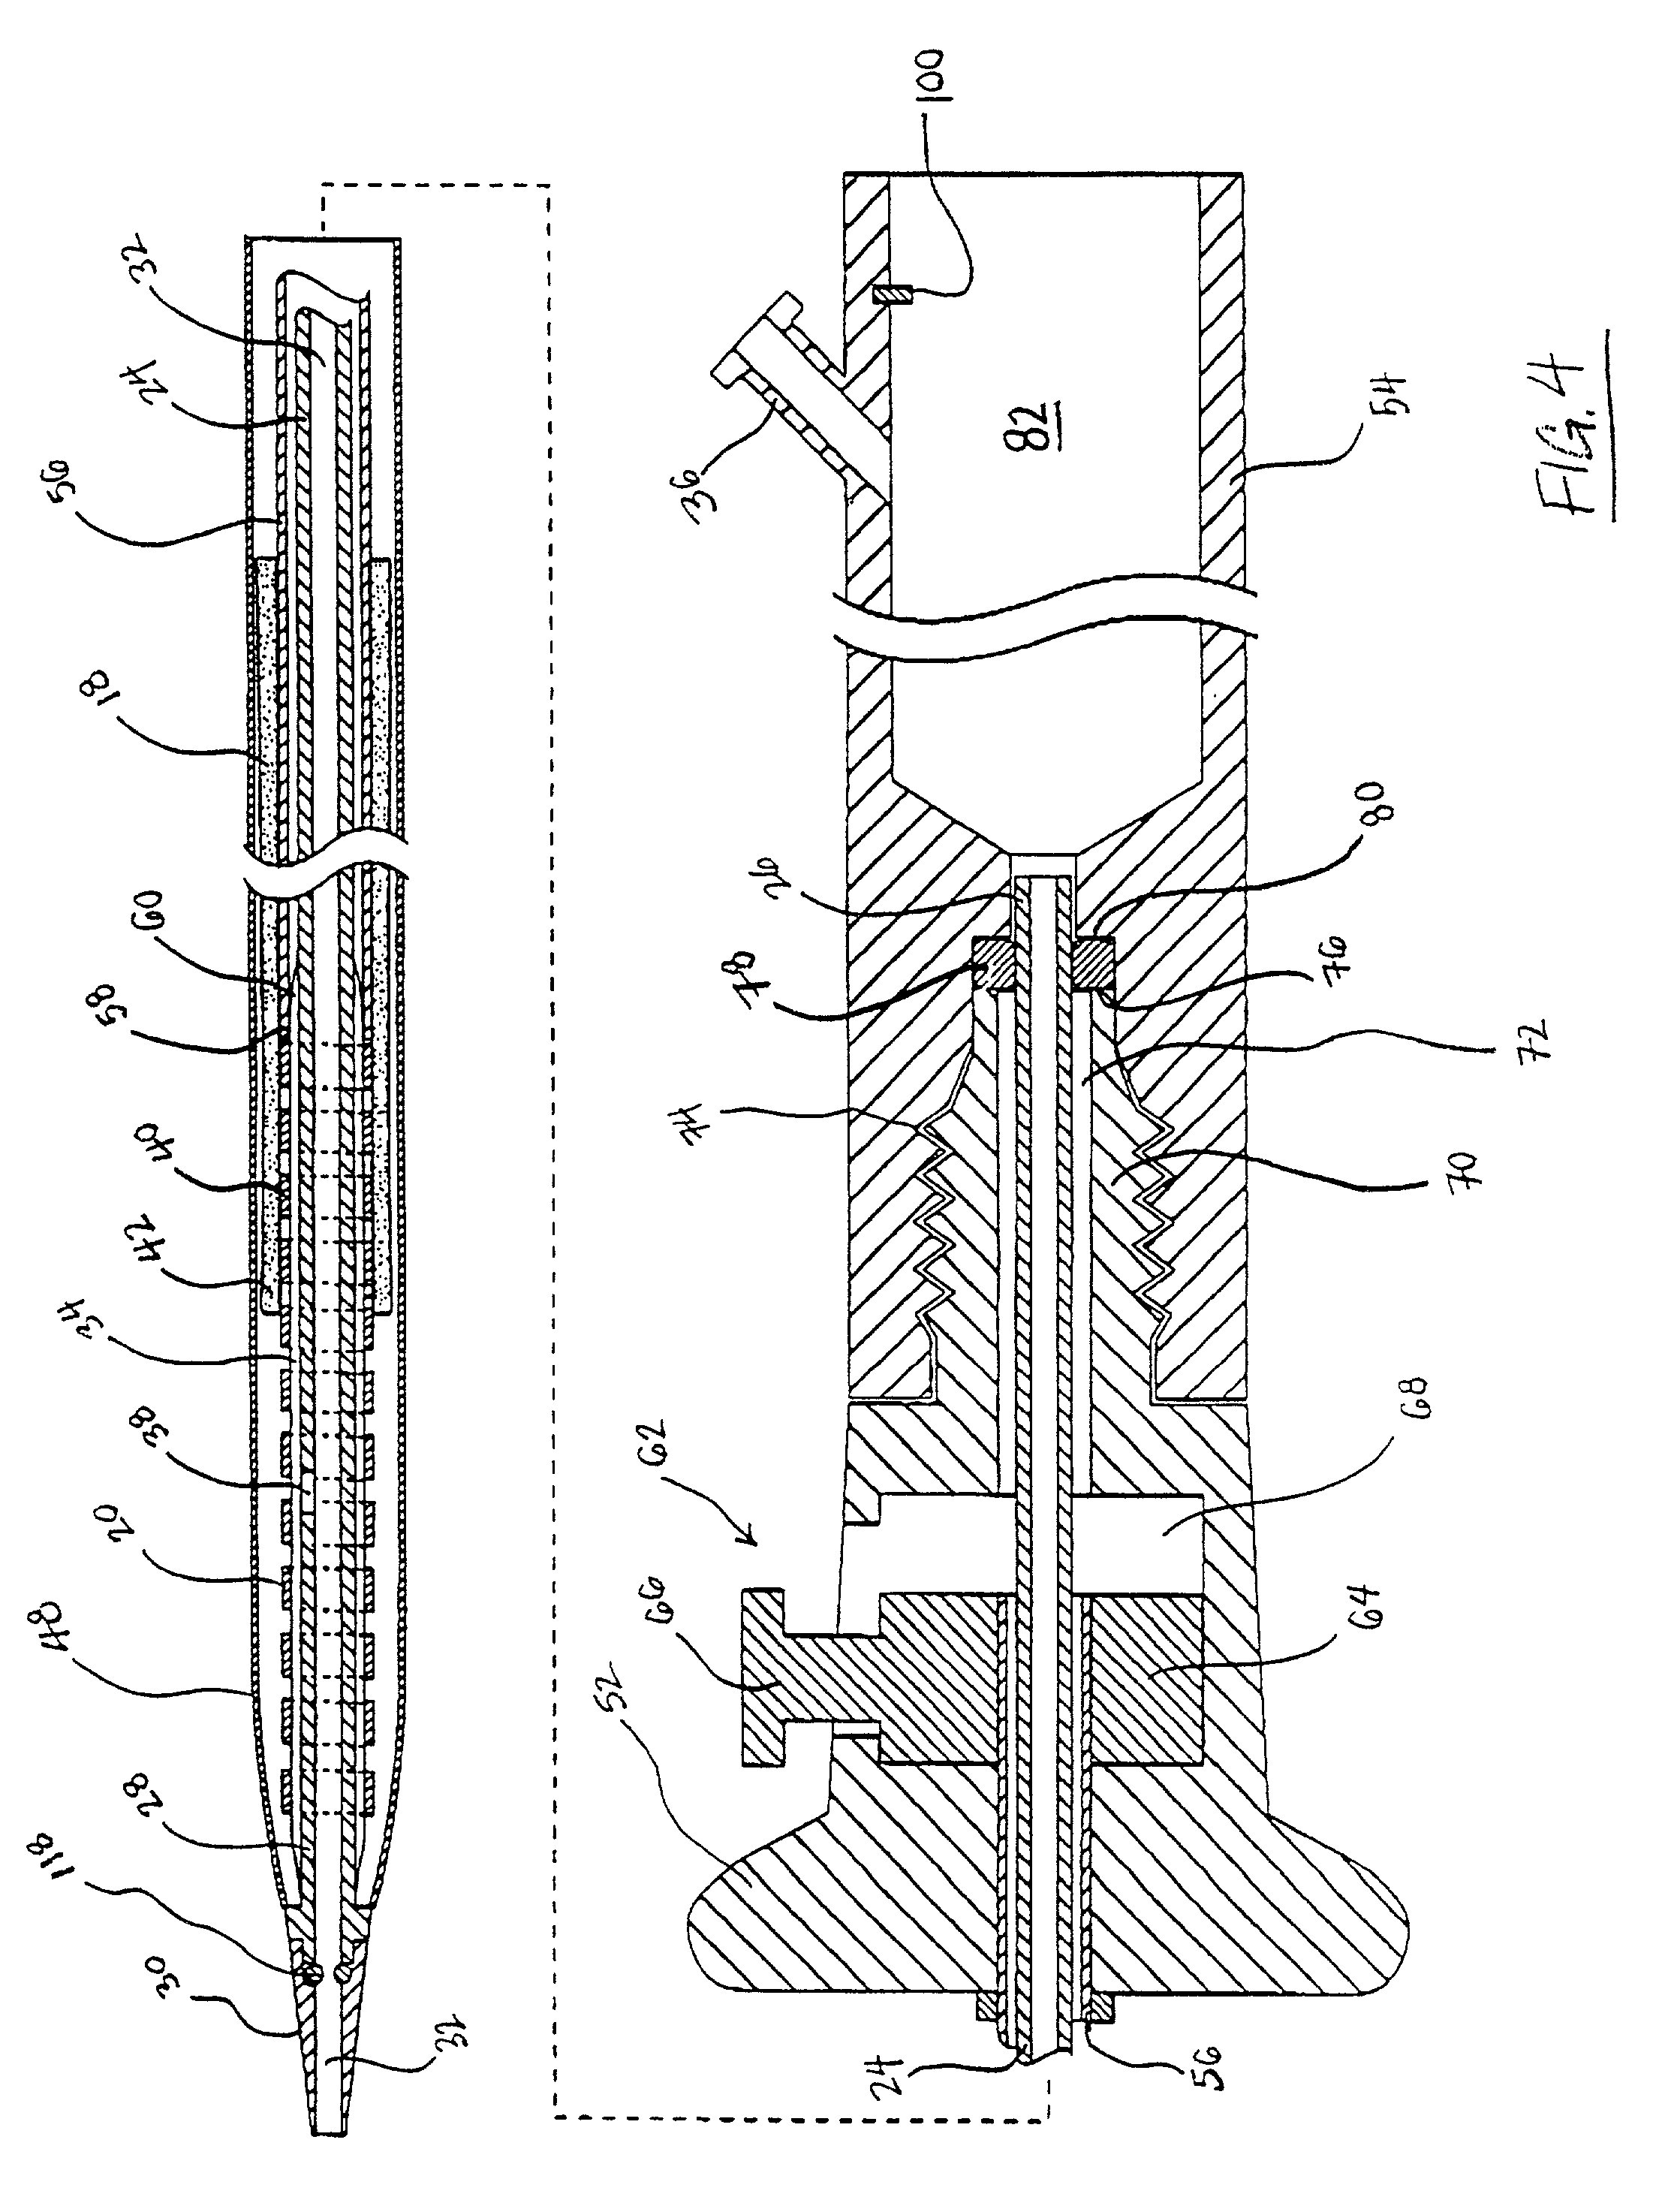 Methods and devices for forming vascular anastomoses